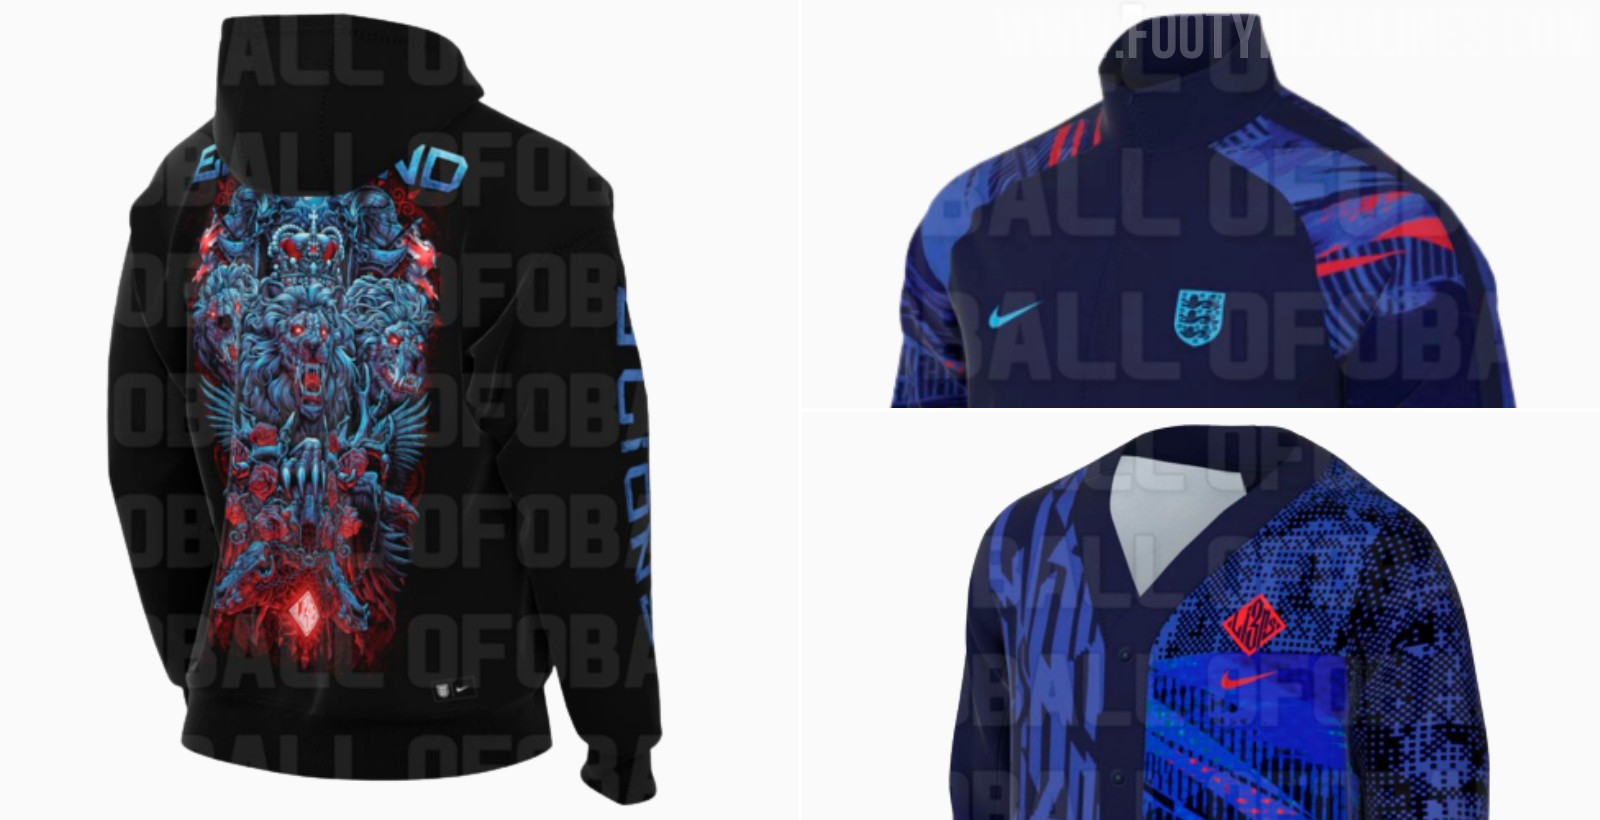 Tremendous Nike England 2022 World Cup Collection Leaked - Footy